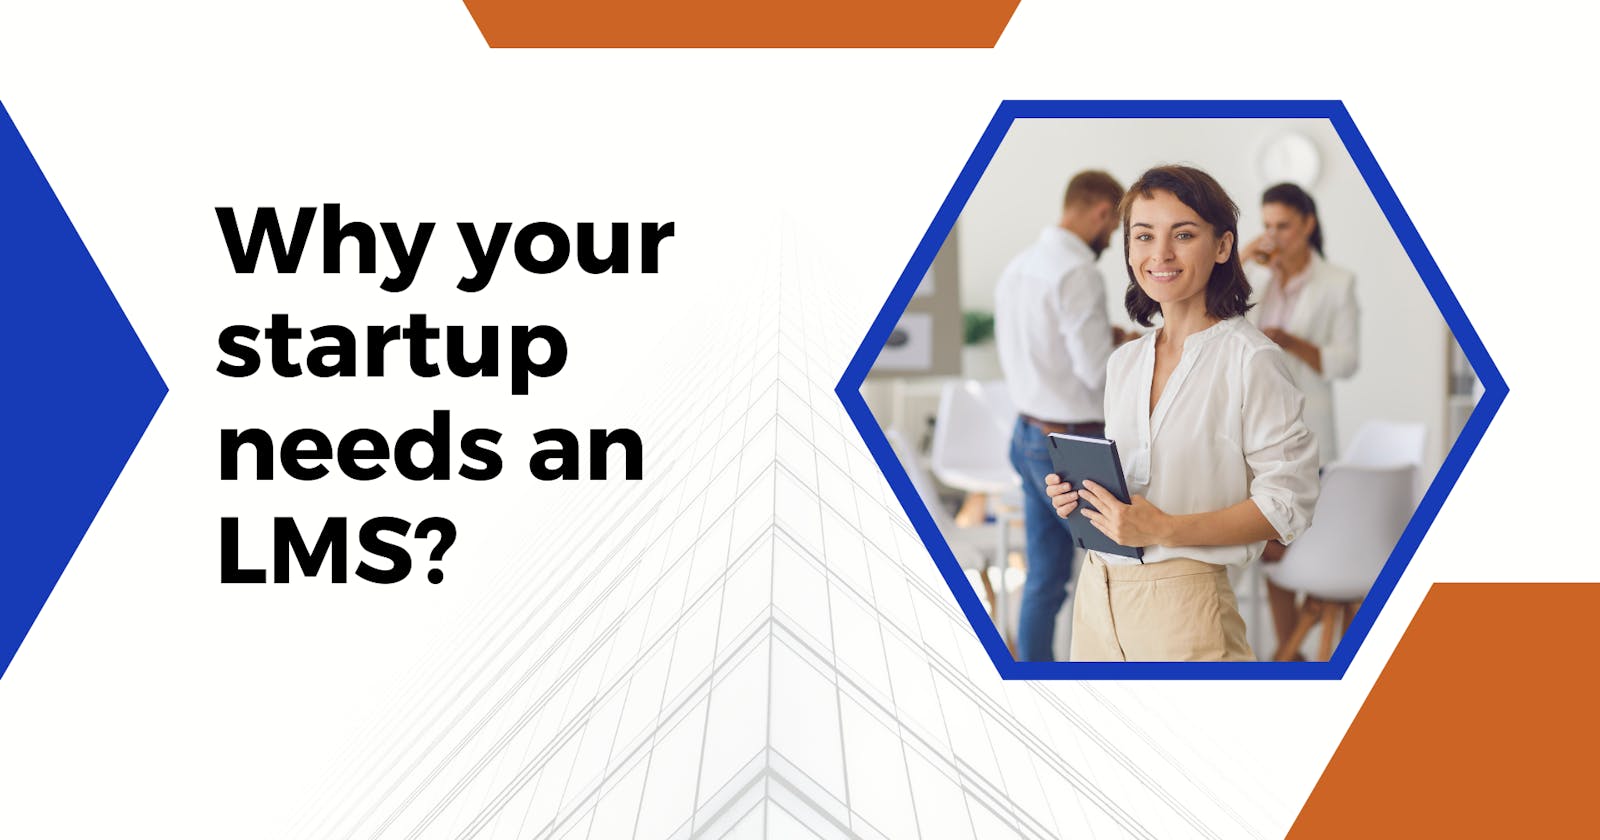 Why your startup needs an LMS?